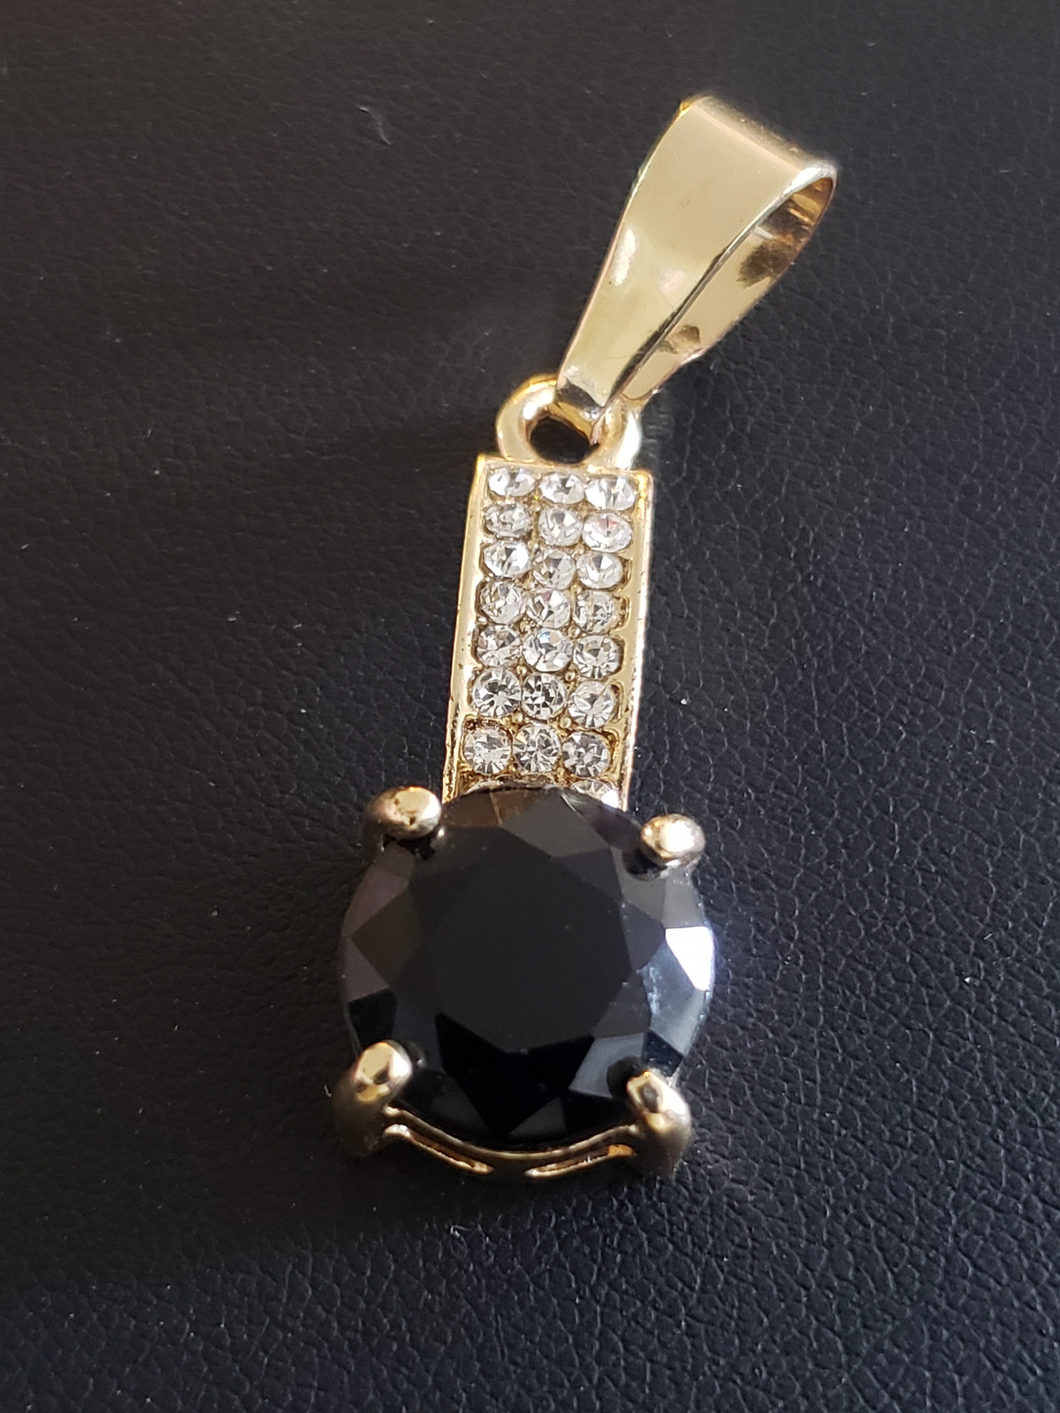 Black crystal with clear crystals